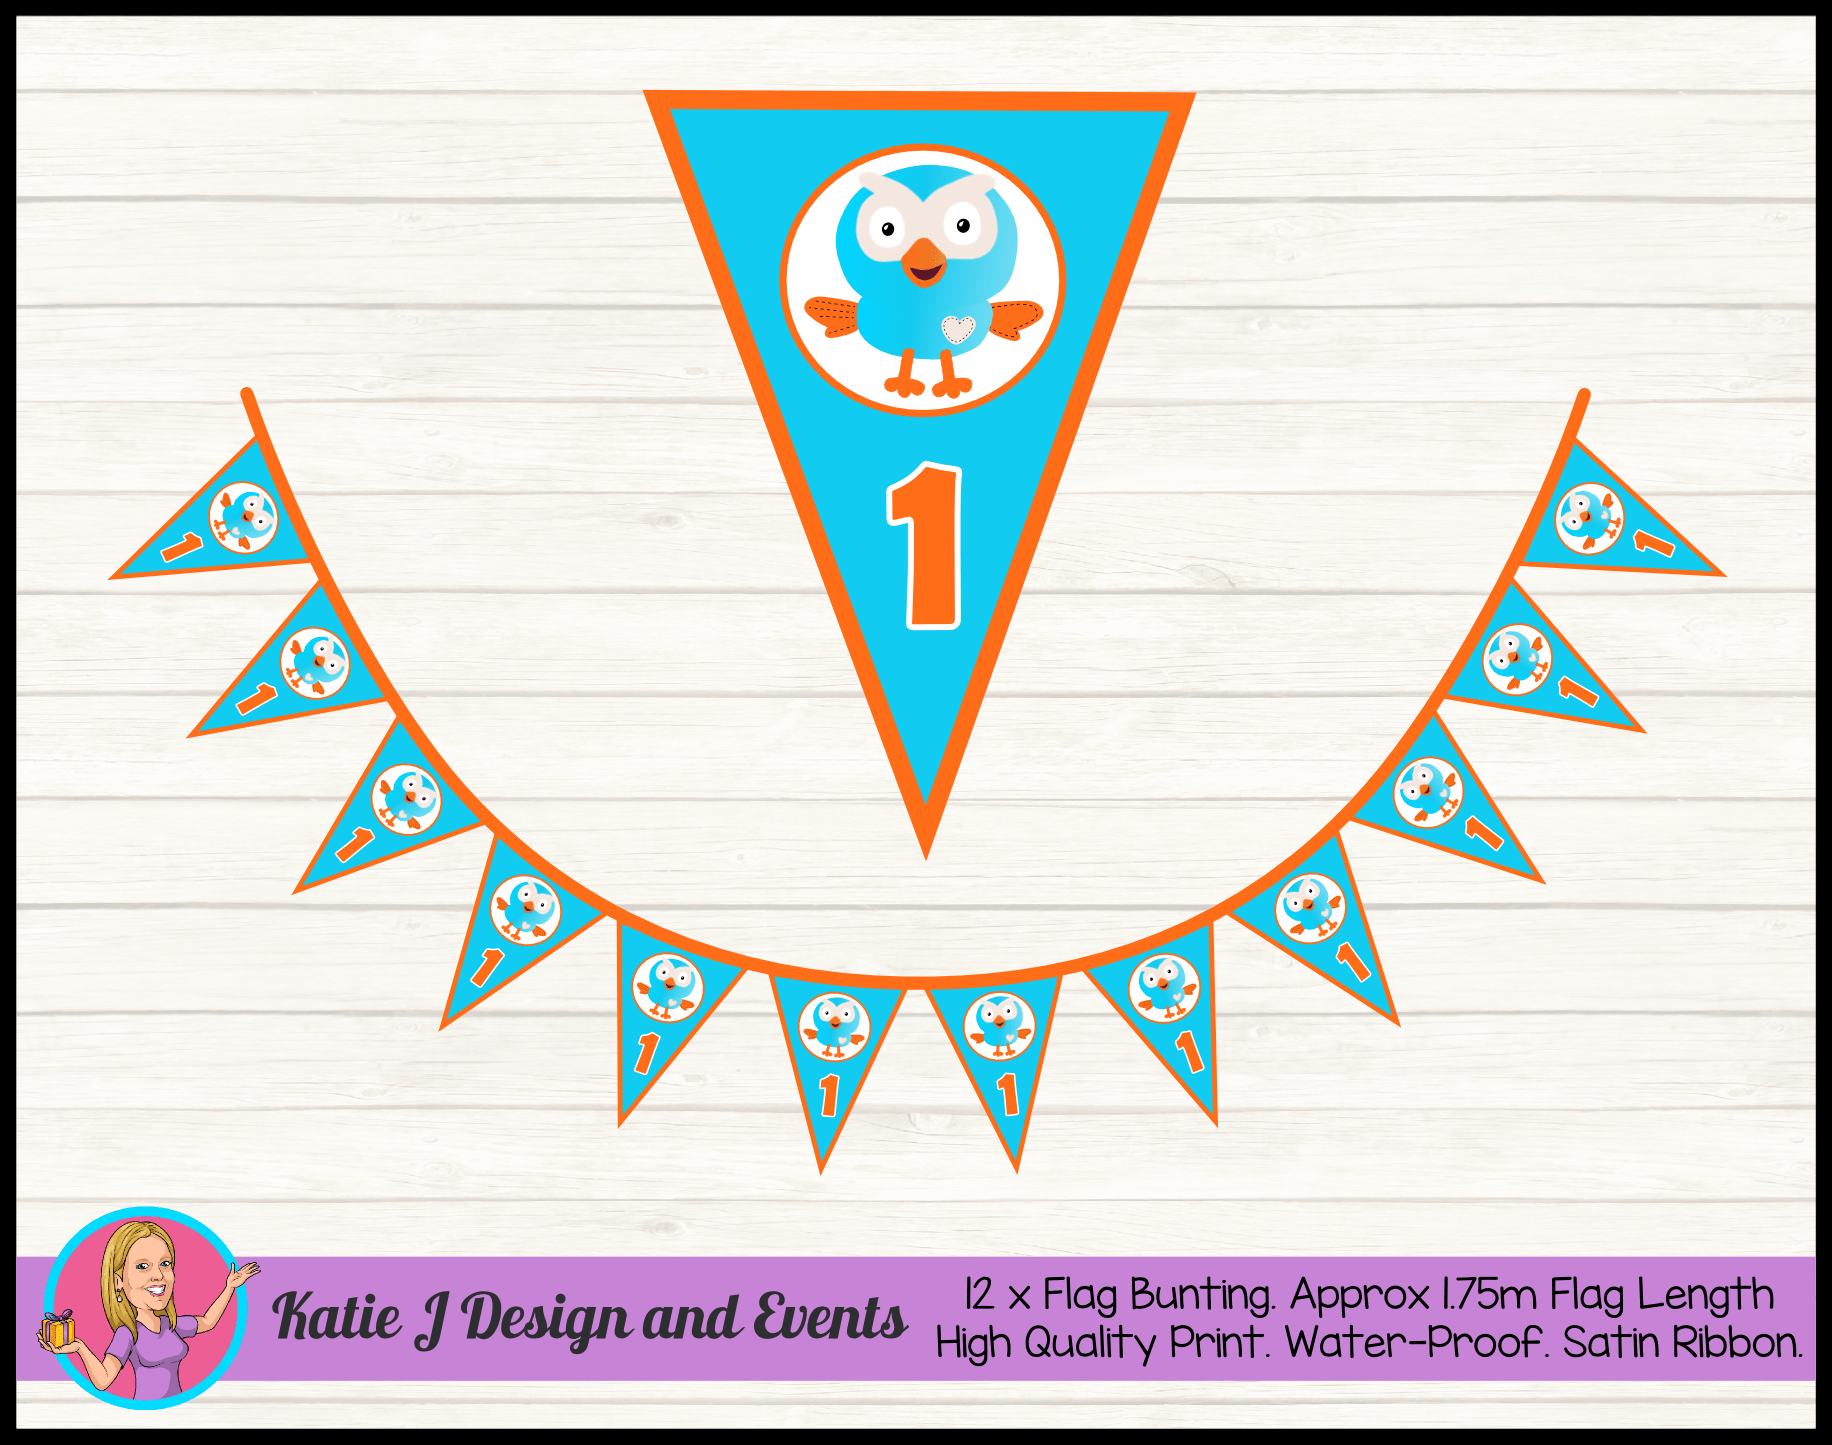 Personalised Hoot Birthday Party Decorations Katie J Design And Events